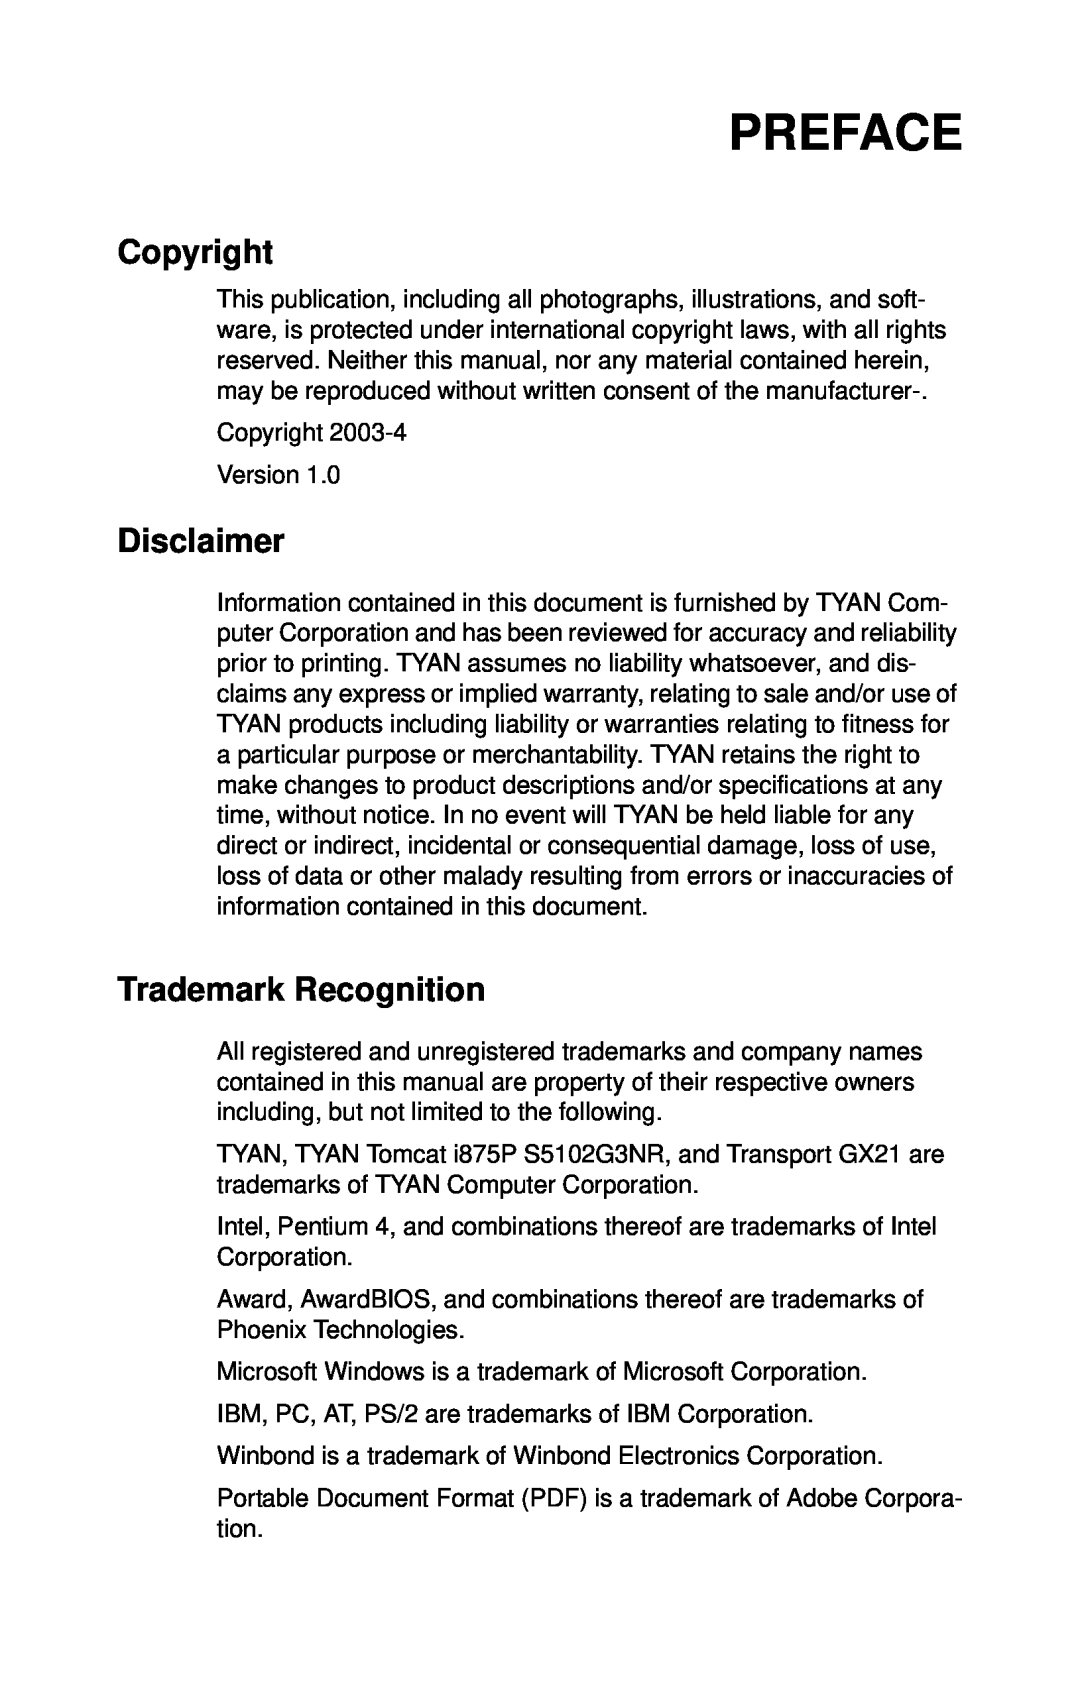 Tyan Computer GX21, B5102 manual Preface, Copyright, Disclaimer, Trademark Recognition 